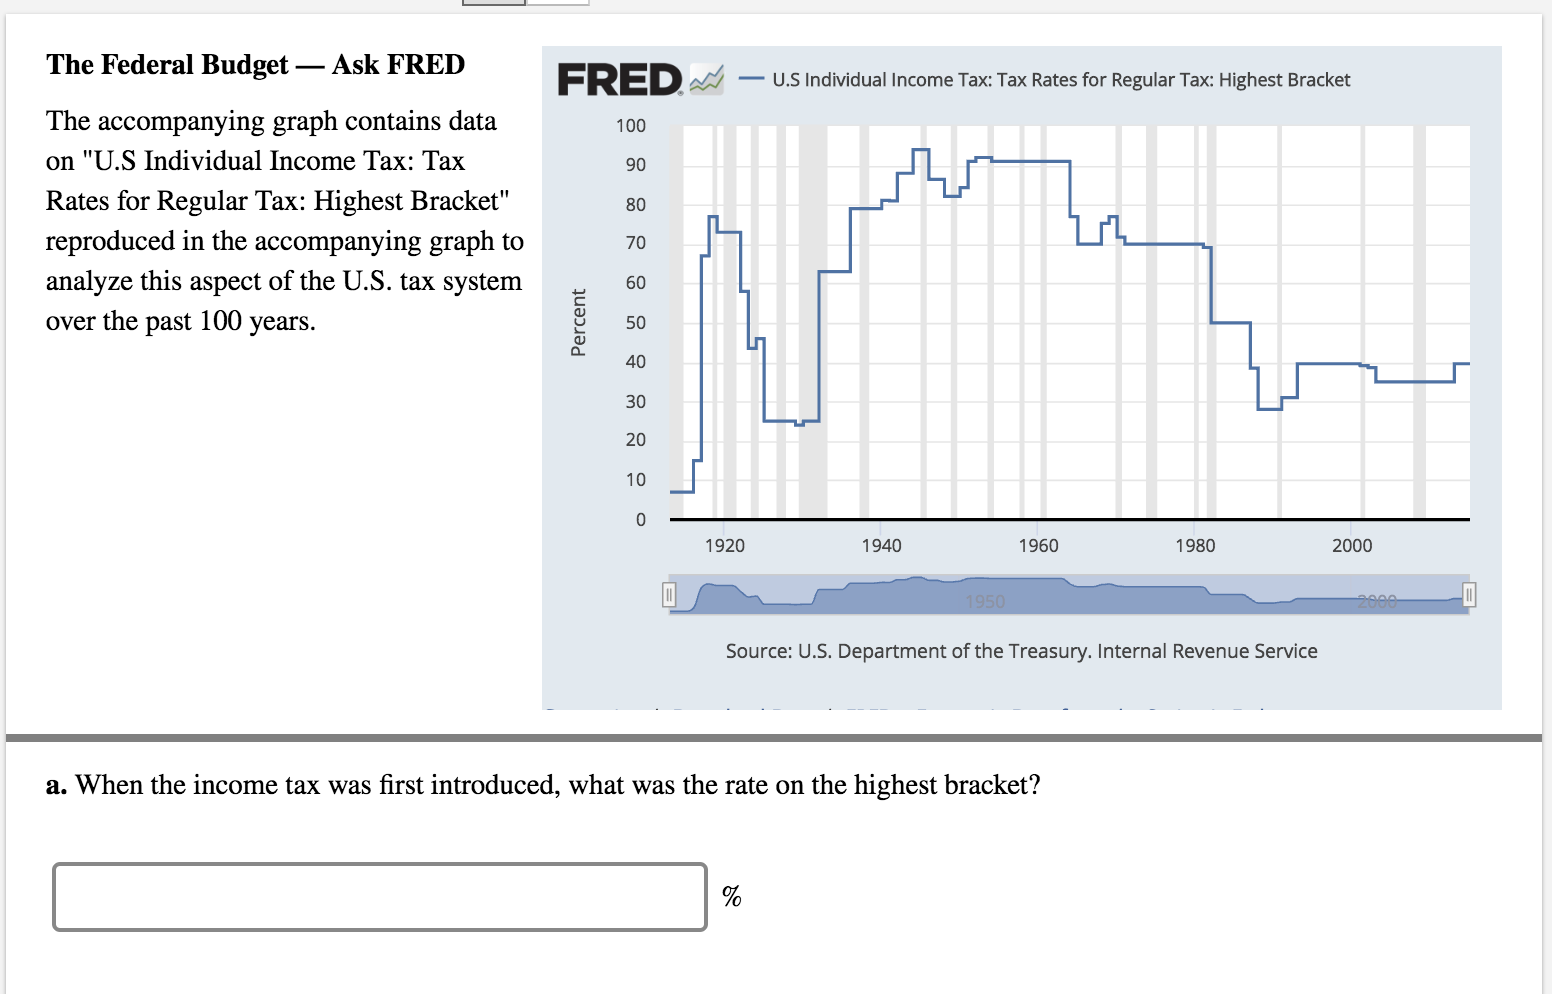 The Federal Budget- Ask FRED
The accompanying graph contains data
on "U.S Individual Income Tax: Tax
Rates for Regular Tax: Highest Bracket'"
reproduced in the accompanying graph to
analyze this aspect of the U.S. tax system_
over the past 100 vears.
FREDU.S Individual Income Tax: Tax Rates for Regular Tax: Highest Bracket
100
90
80
70
60
50
a 40
30
20
10
0
1920
1940
1960
1980
2000
Source: U.S. Department of the Treasury. Internal Revenue Service
a. When the income tax was first introduced, what was the rate on the highest bracket?
